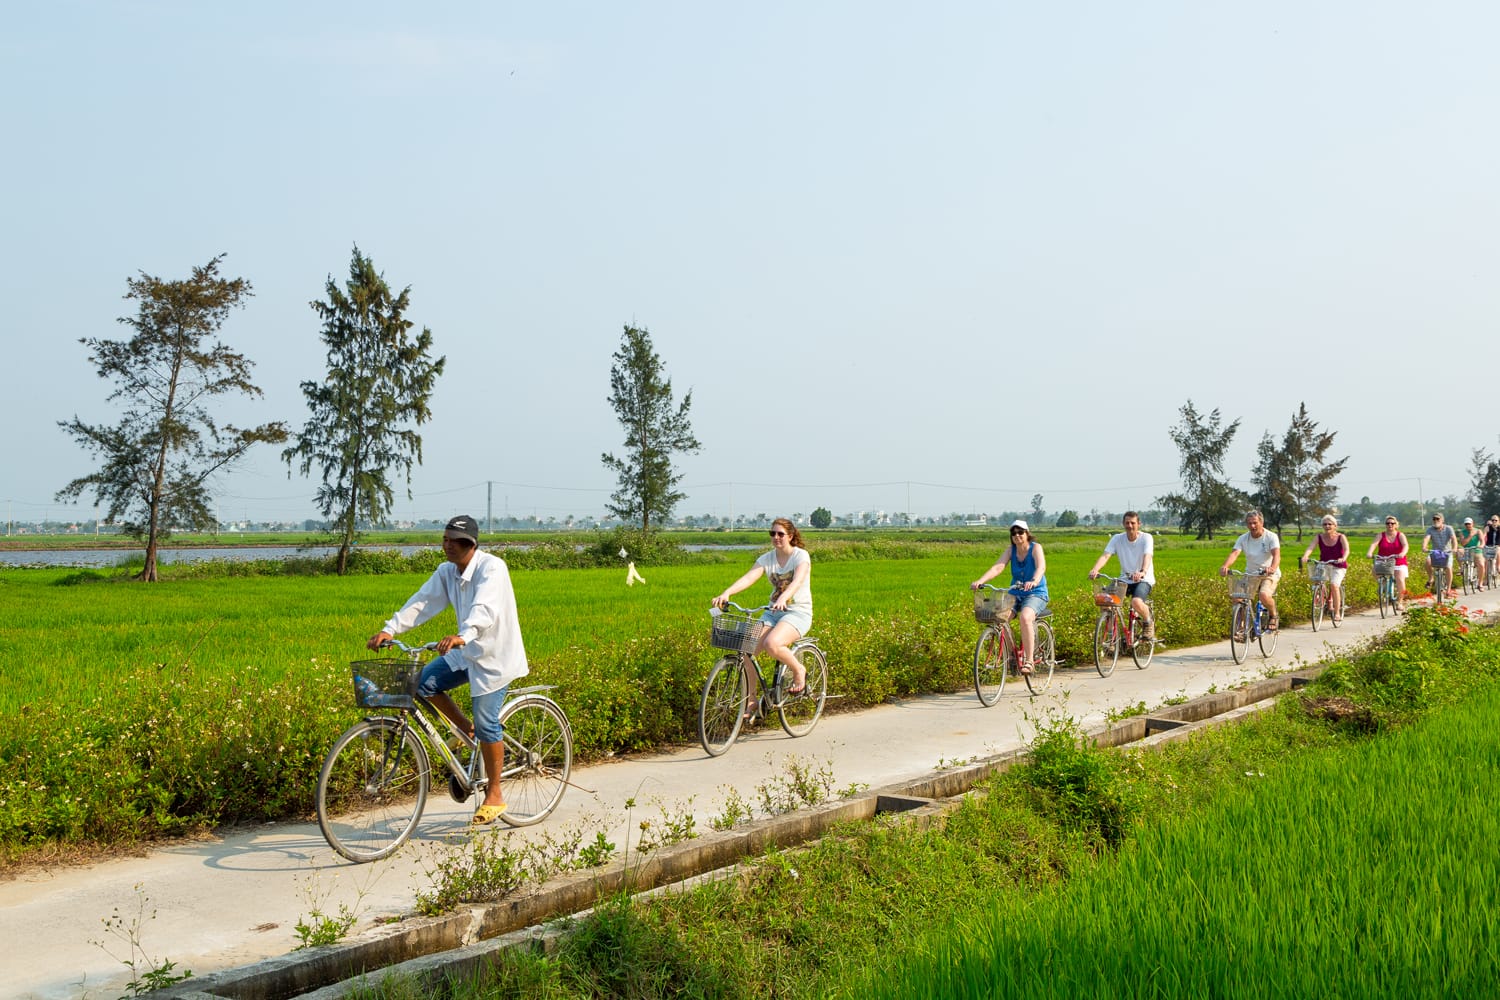 Tourists ride bicycles through rice paddies behind their guide in Hoi An, Vietnan